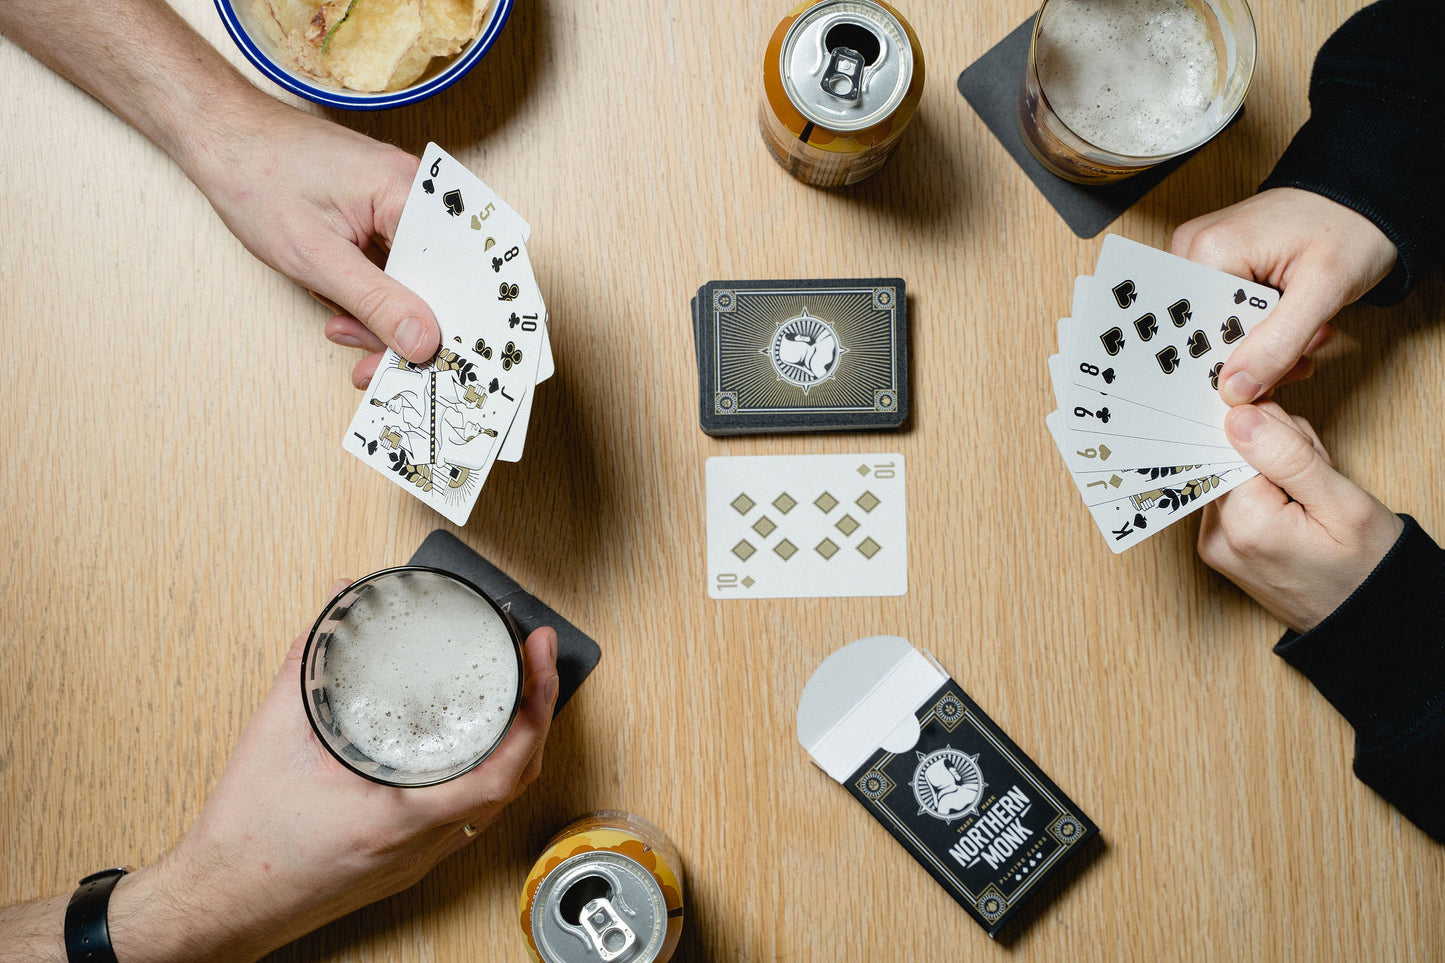 NORTHERN MONK PLAYING CARDS